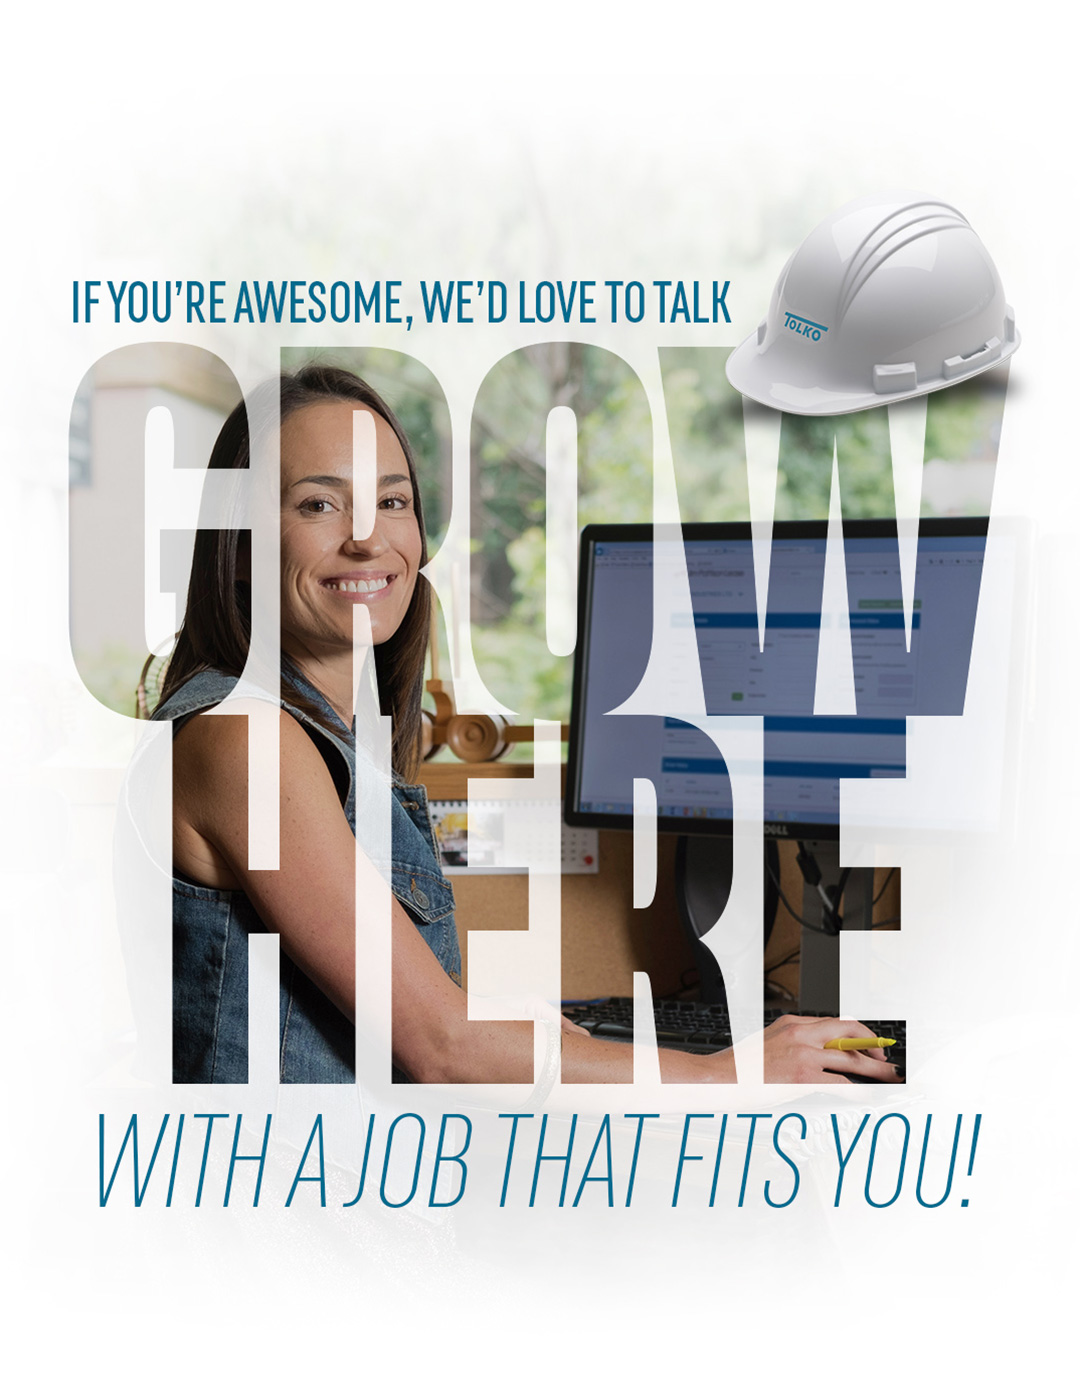 If you're awesome, we'd love to talk! Grow here with a job that fits you